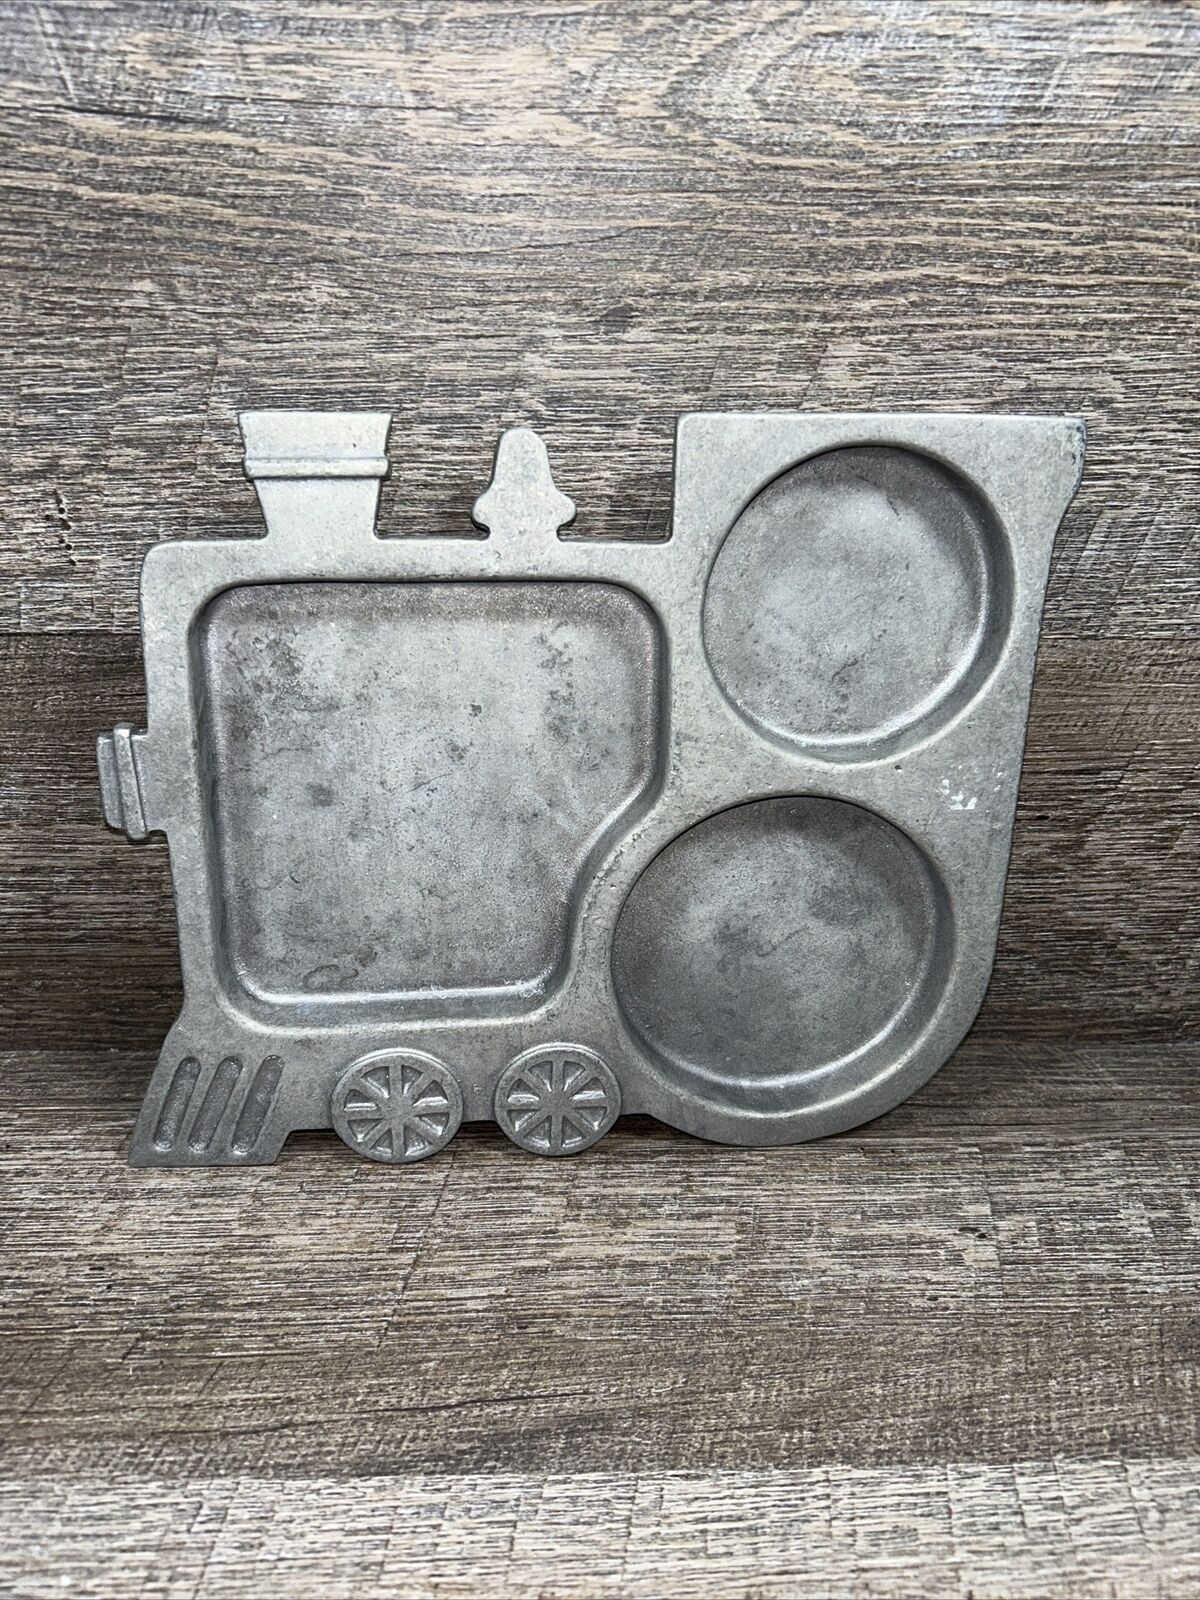 VTG York Metalcrafters Train-shaped Tray 1975 Pewter